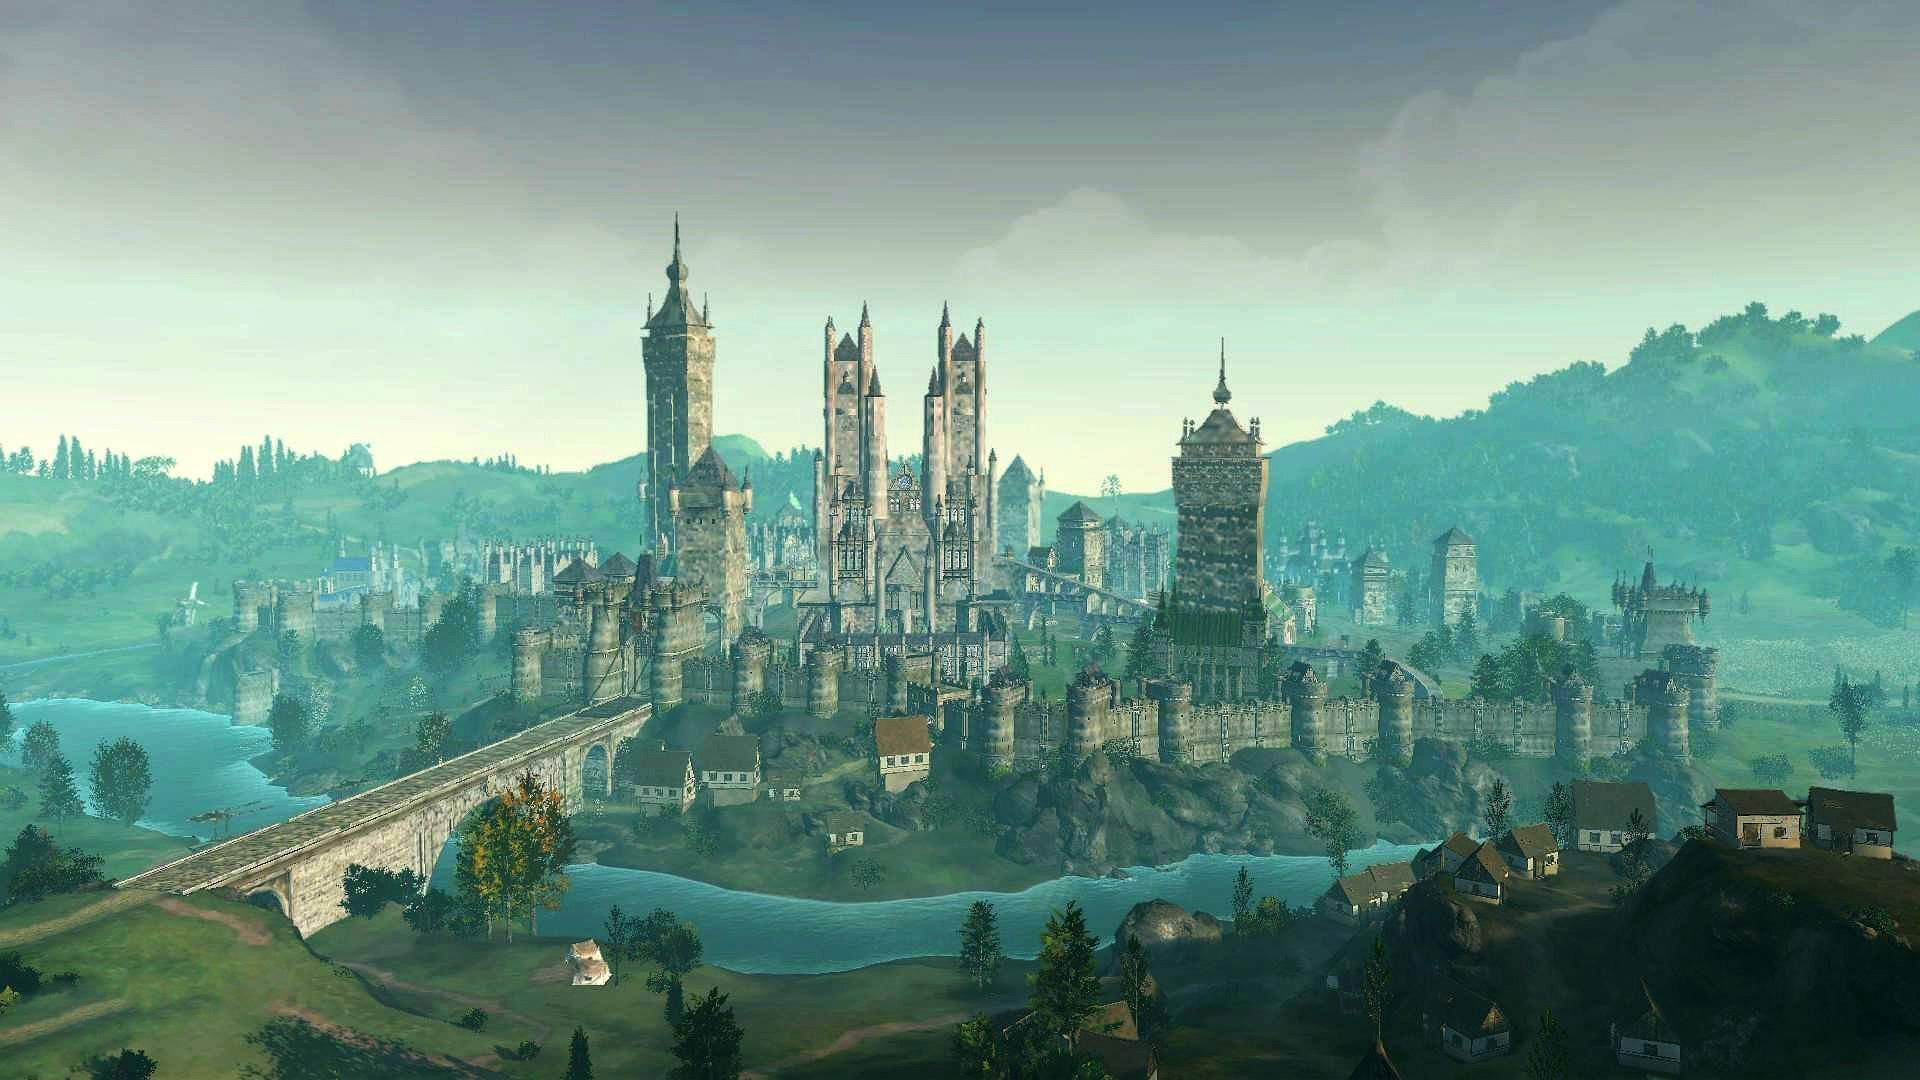 ArcheAge Wallpapers